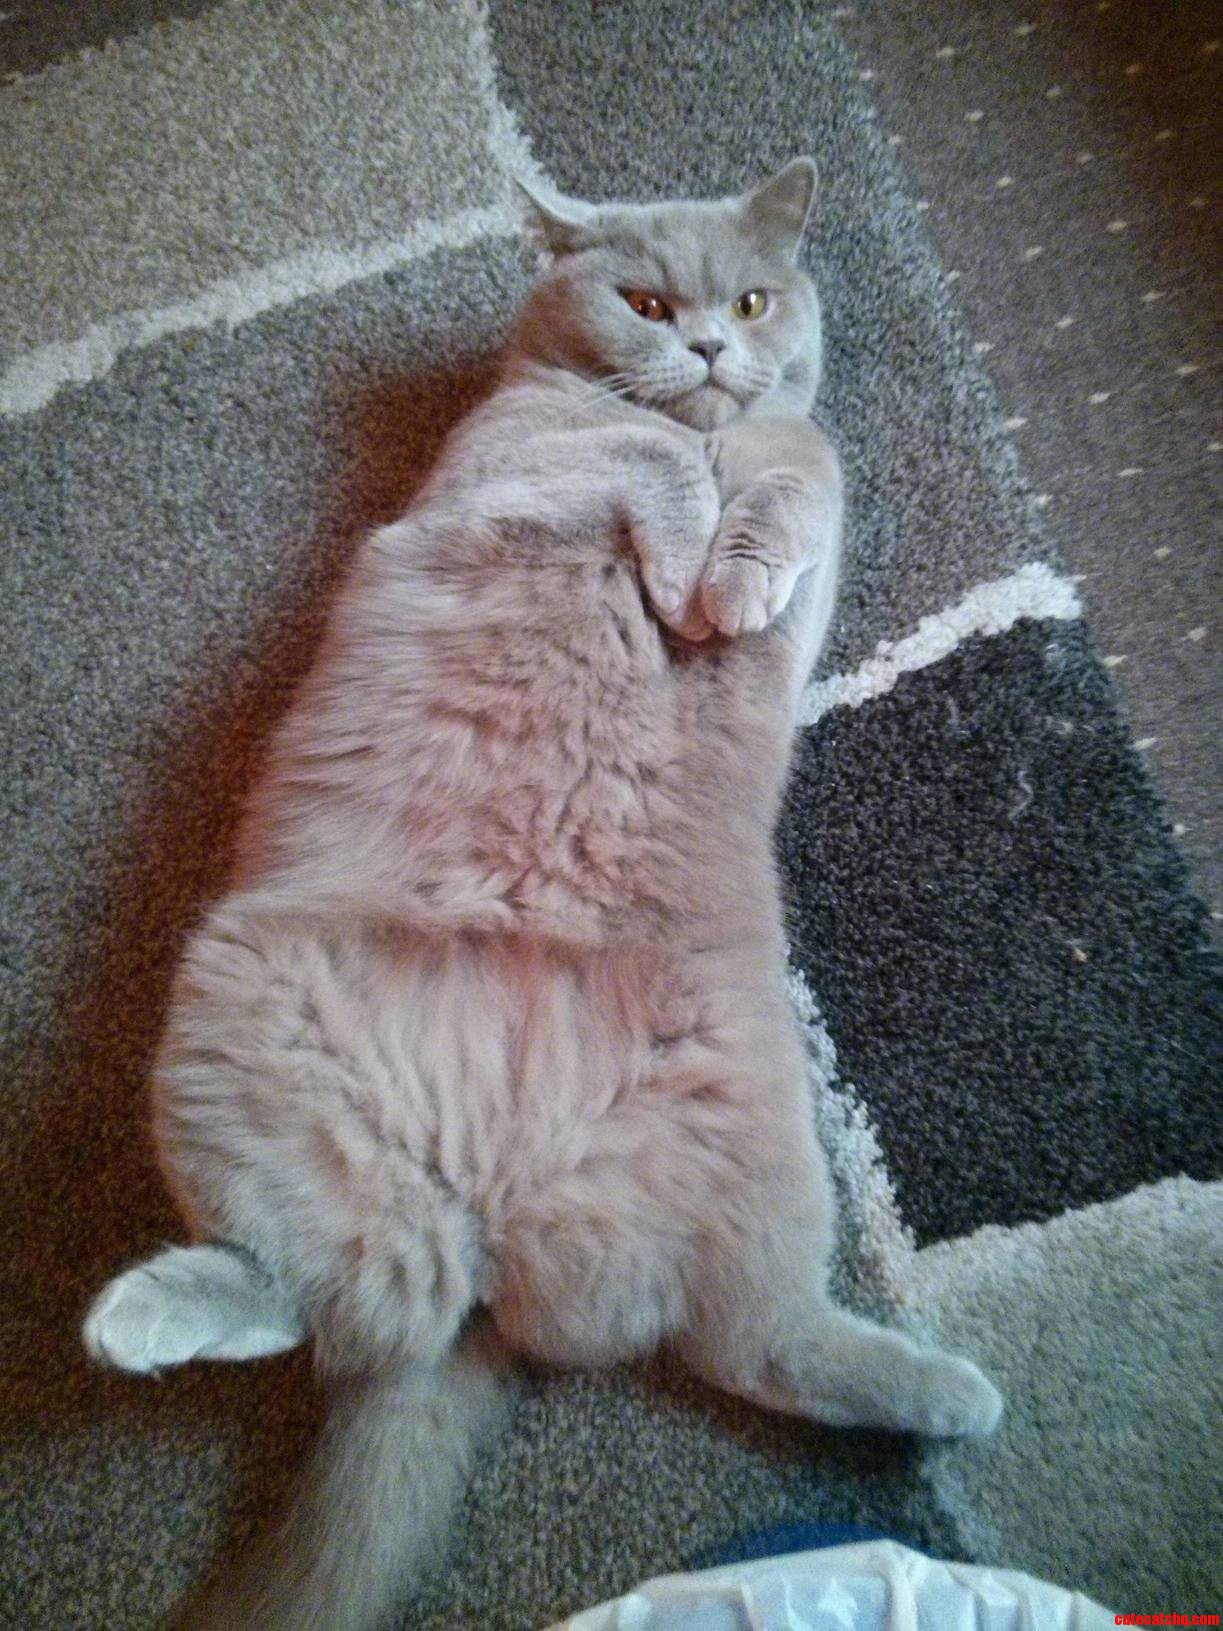 Look At That Fluffy Belly